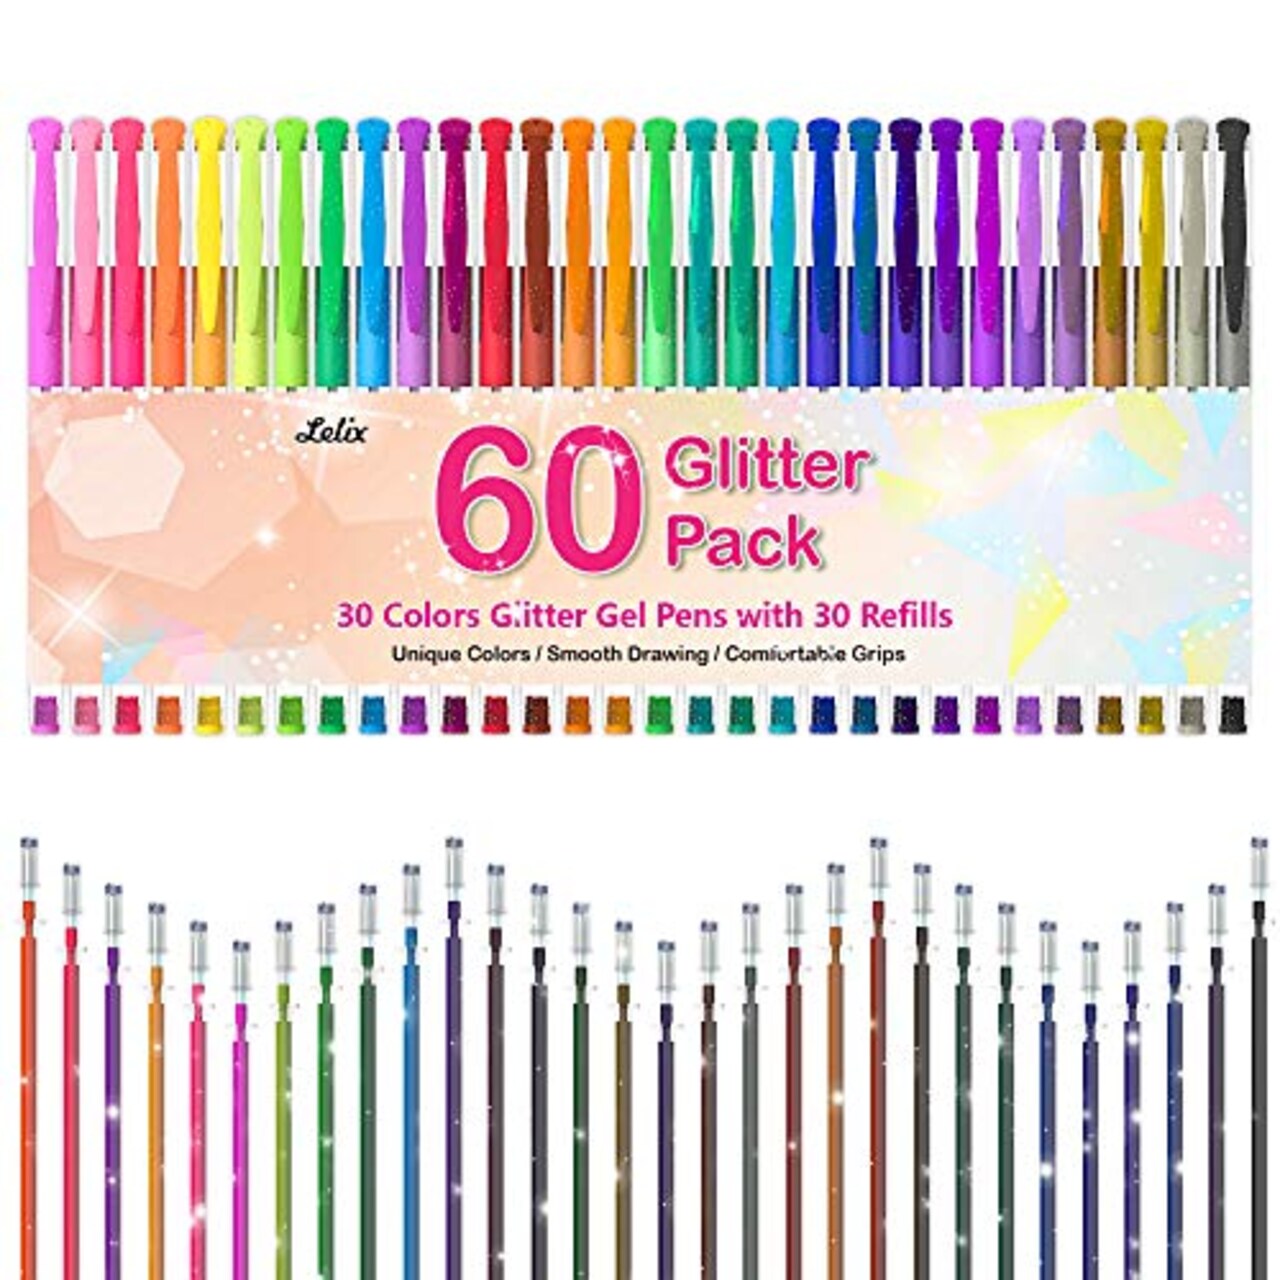 Glitter Gel Pens, Lelix 60 Pack Glitter Gel Pen Set, 30 Glitter Colors with  30 Refills for Kids Adult Coloring Books, Drawing, Doodling, Crafting,  Journaling, Scrapbooking